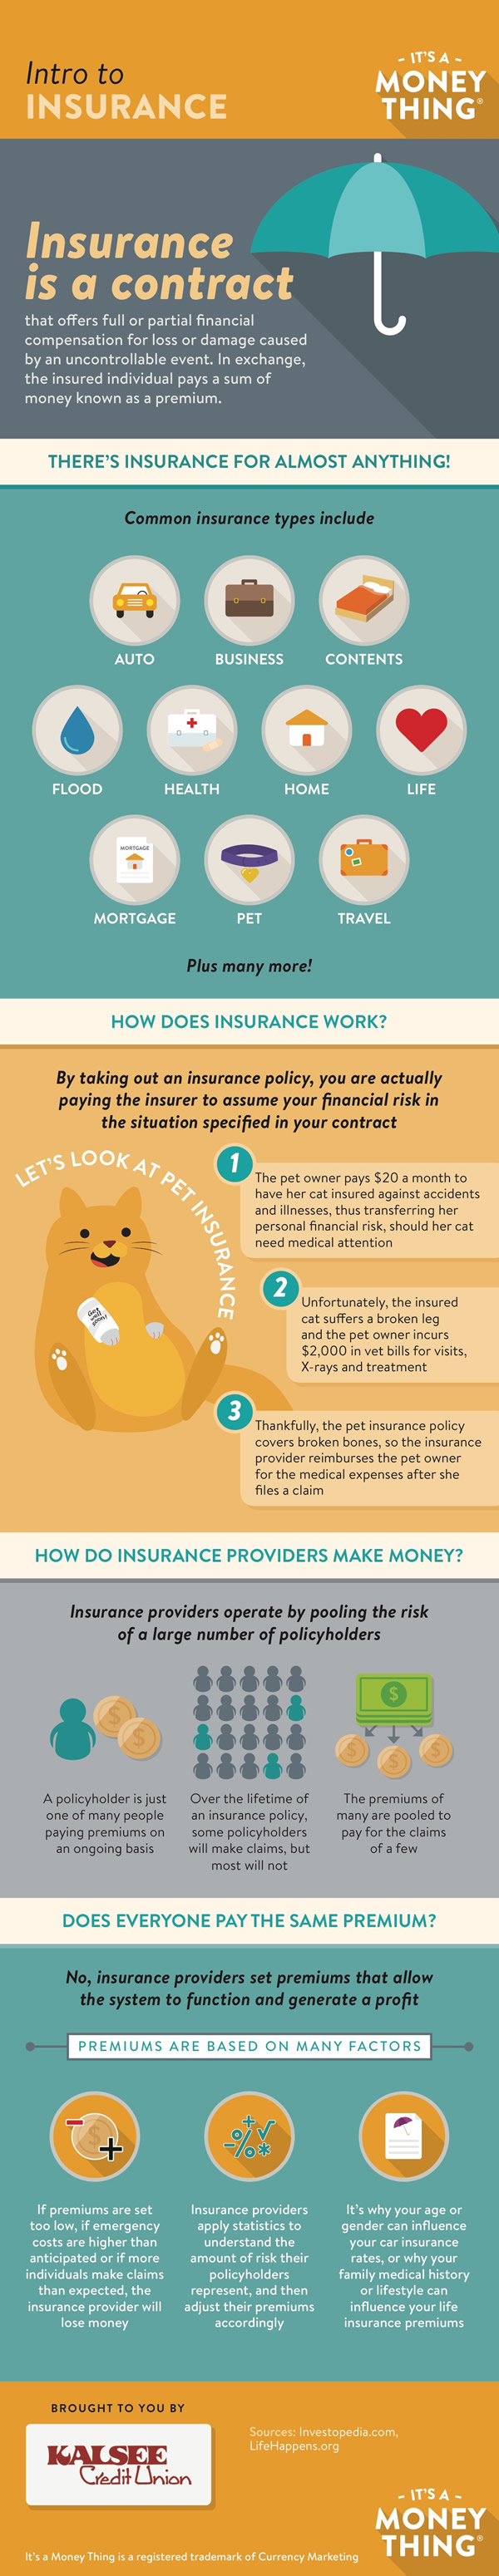 Intro to Insurance infographic, click for transcription